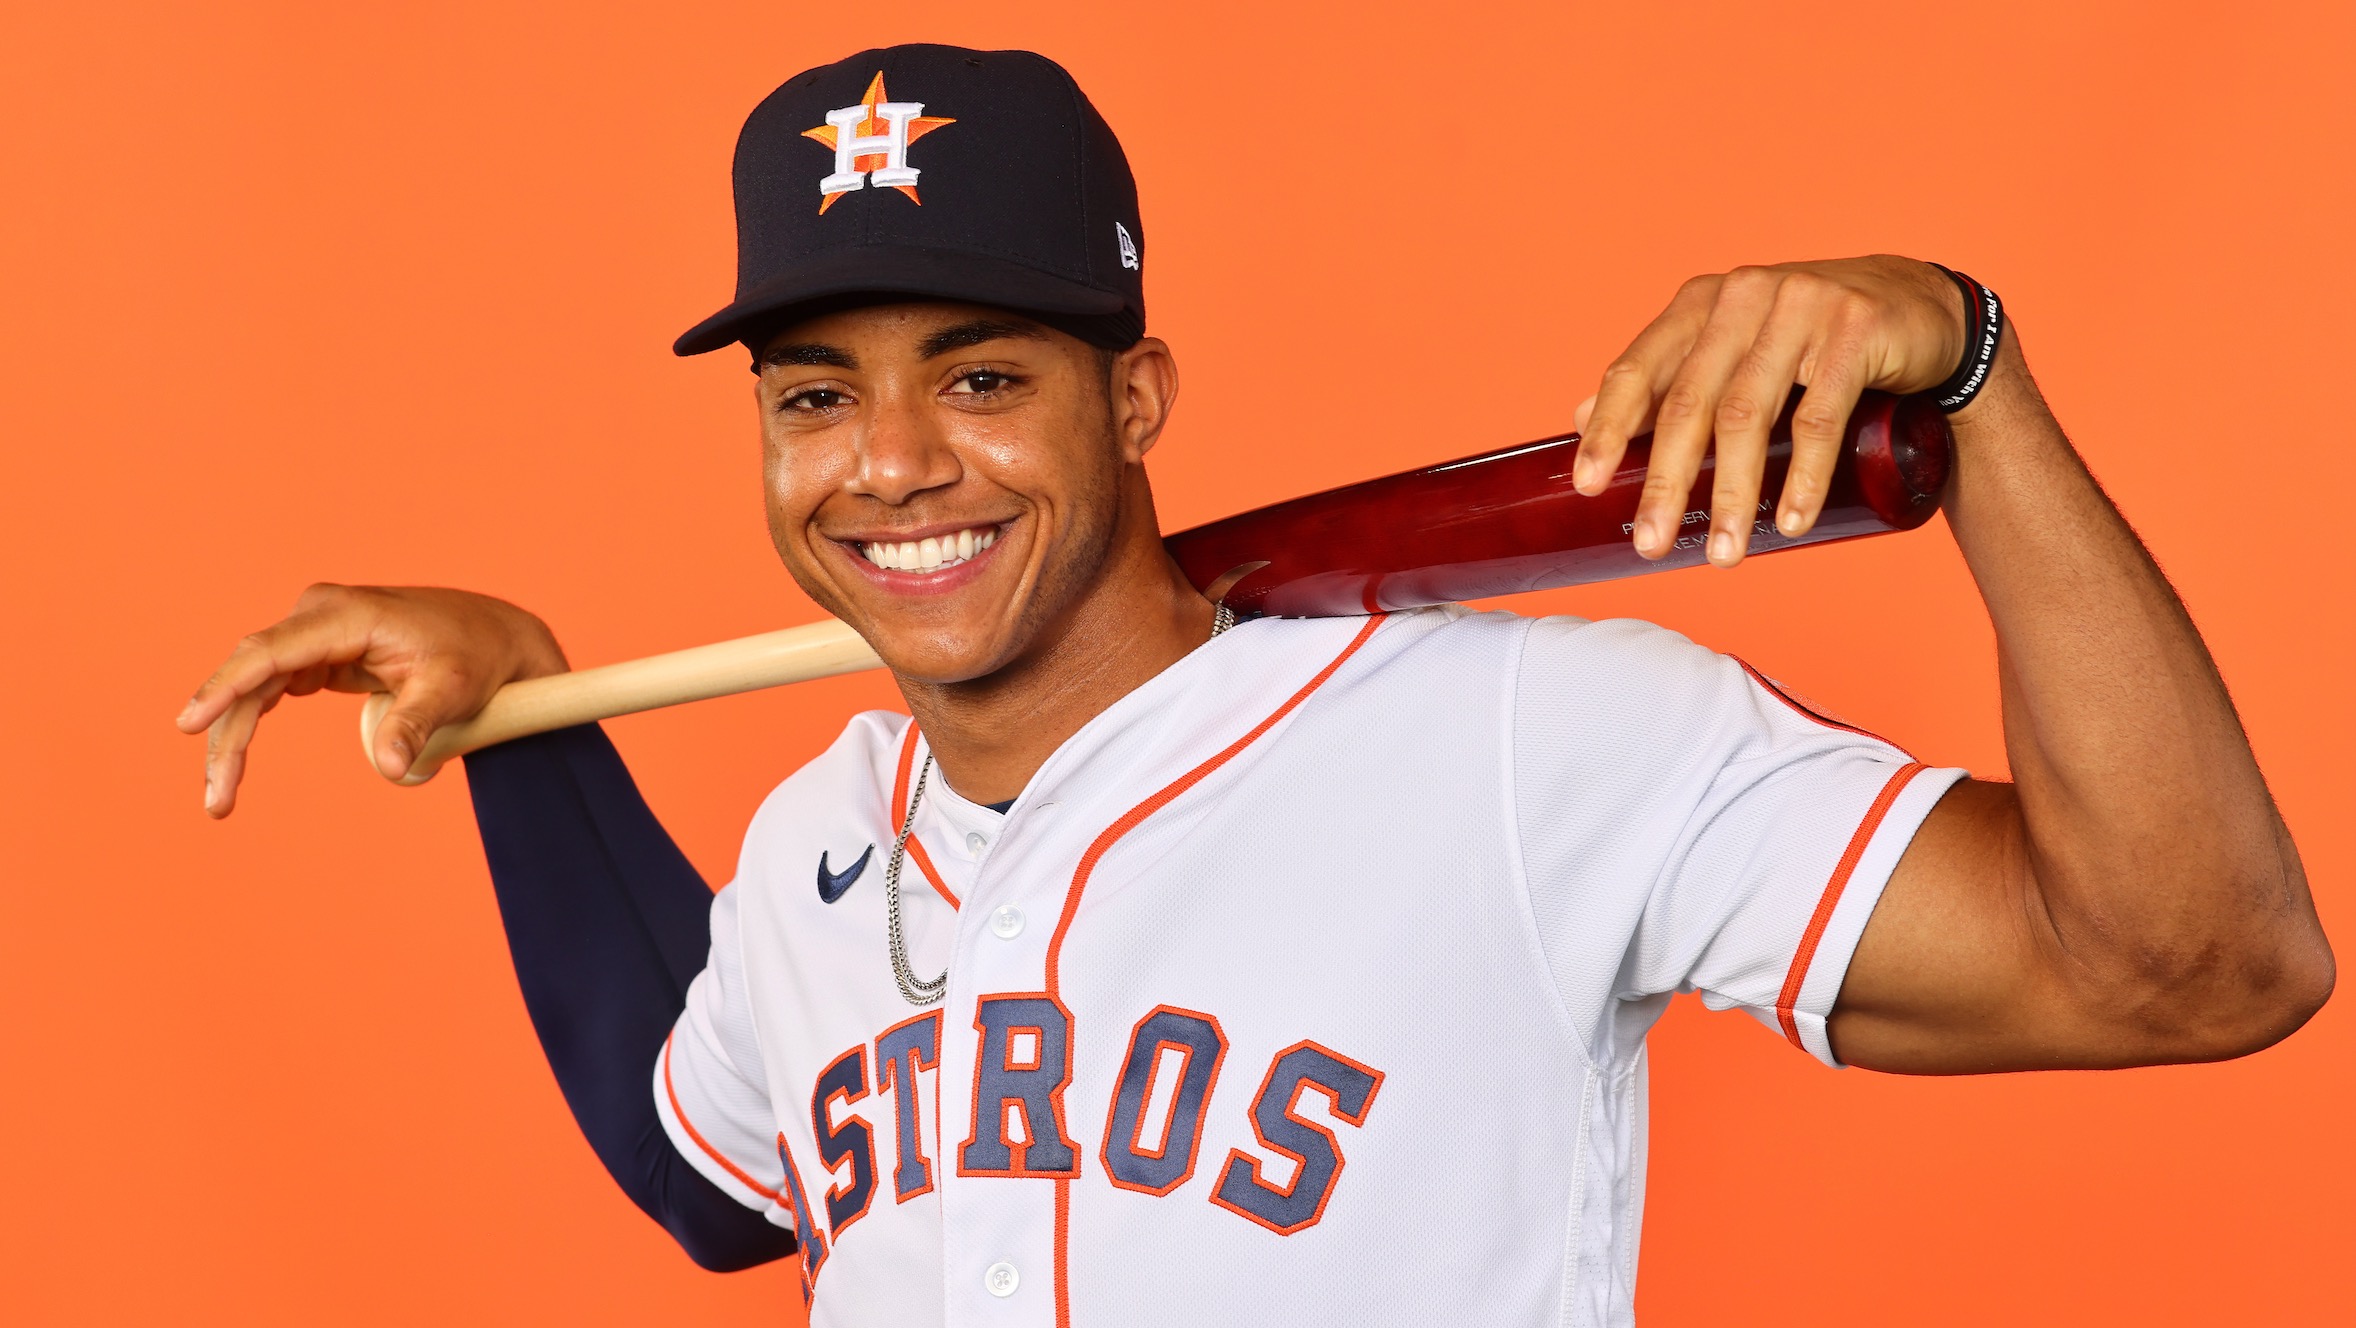 MLB Players Media on X: If you think @astros shortstop Jeremy Peña is cool  -- you're right. #LevelUp #WorldSeries @Jpena221  /  X